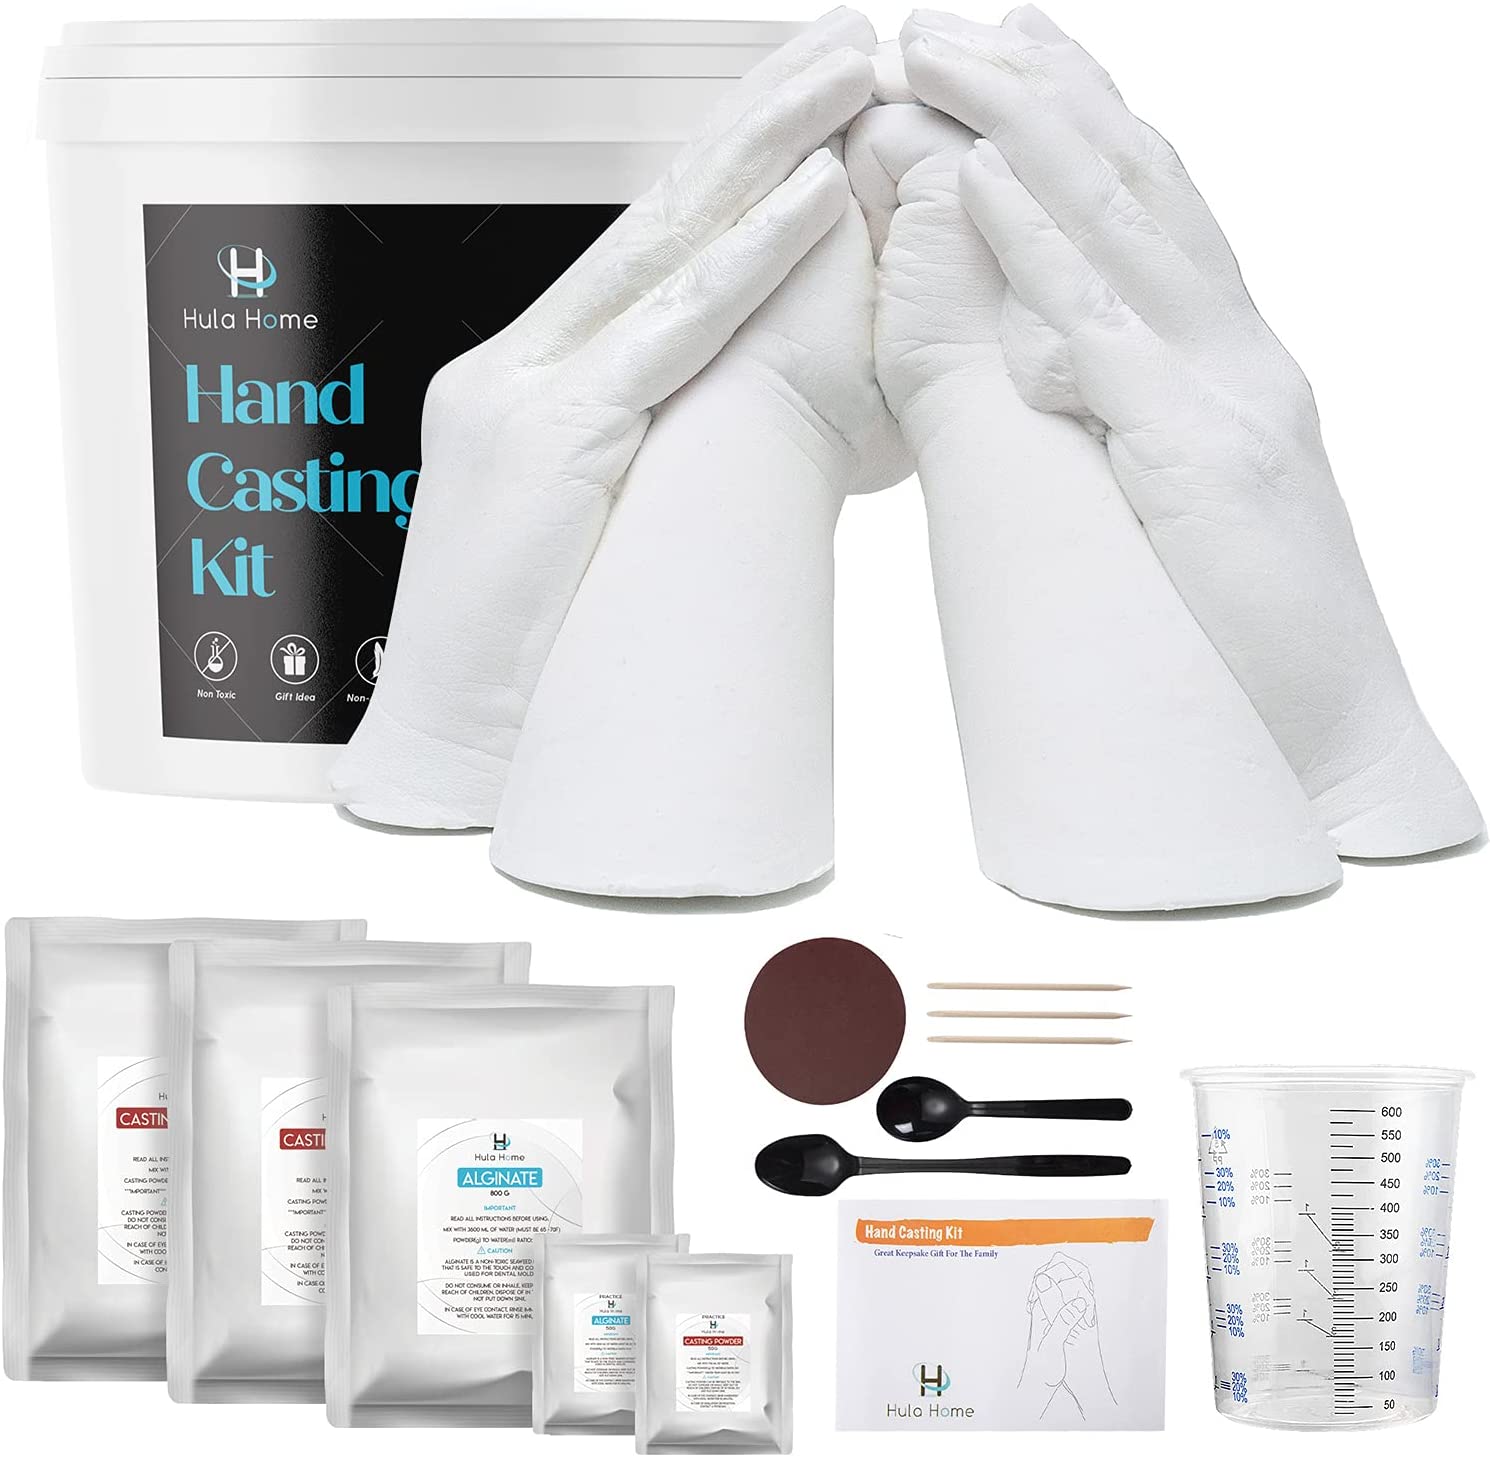 XL Hand Casting Kit for Families, Up to 6 Hands (Adults and